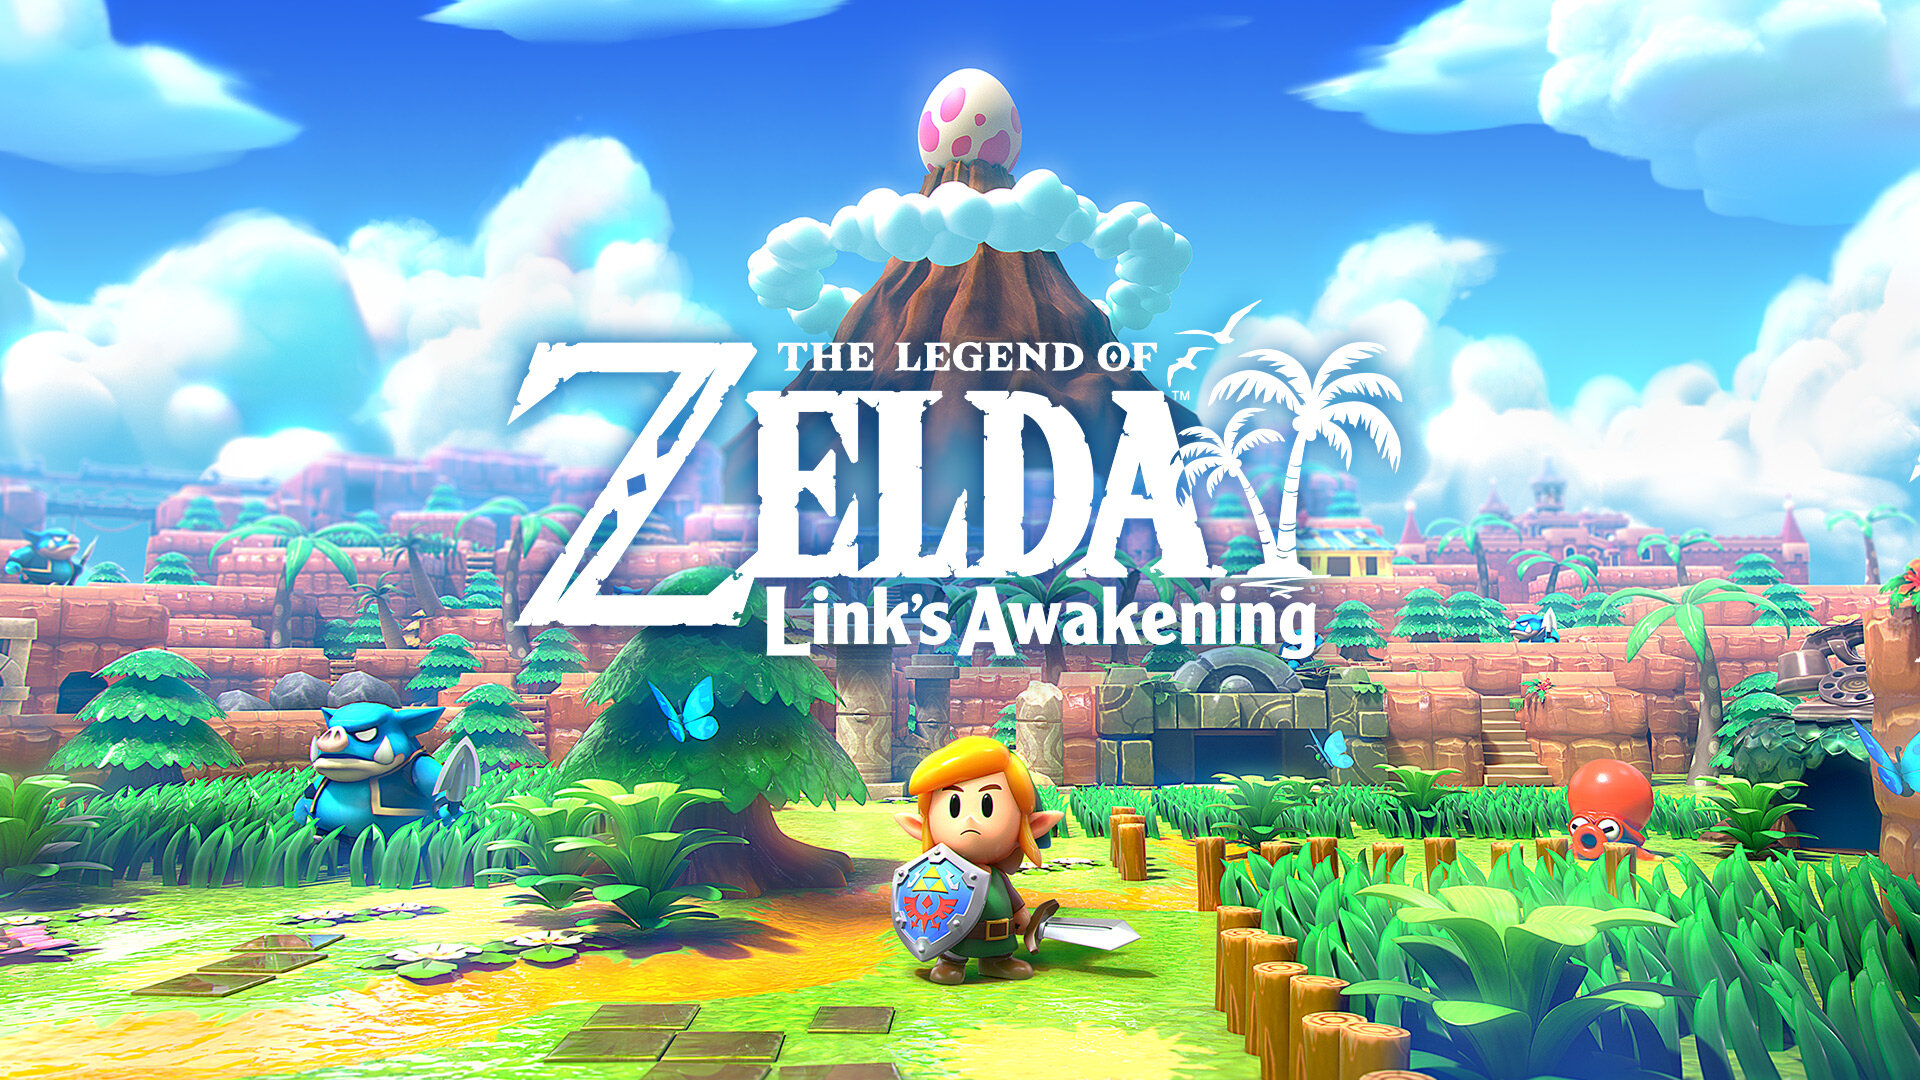 The Legend of Zelda: Link's Awakening comes with double-sided